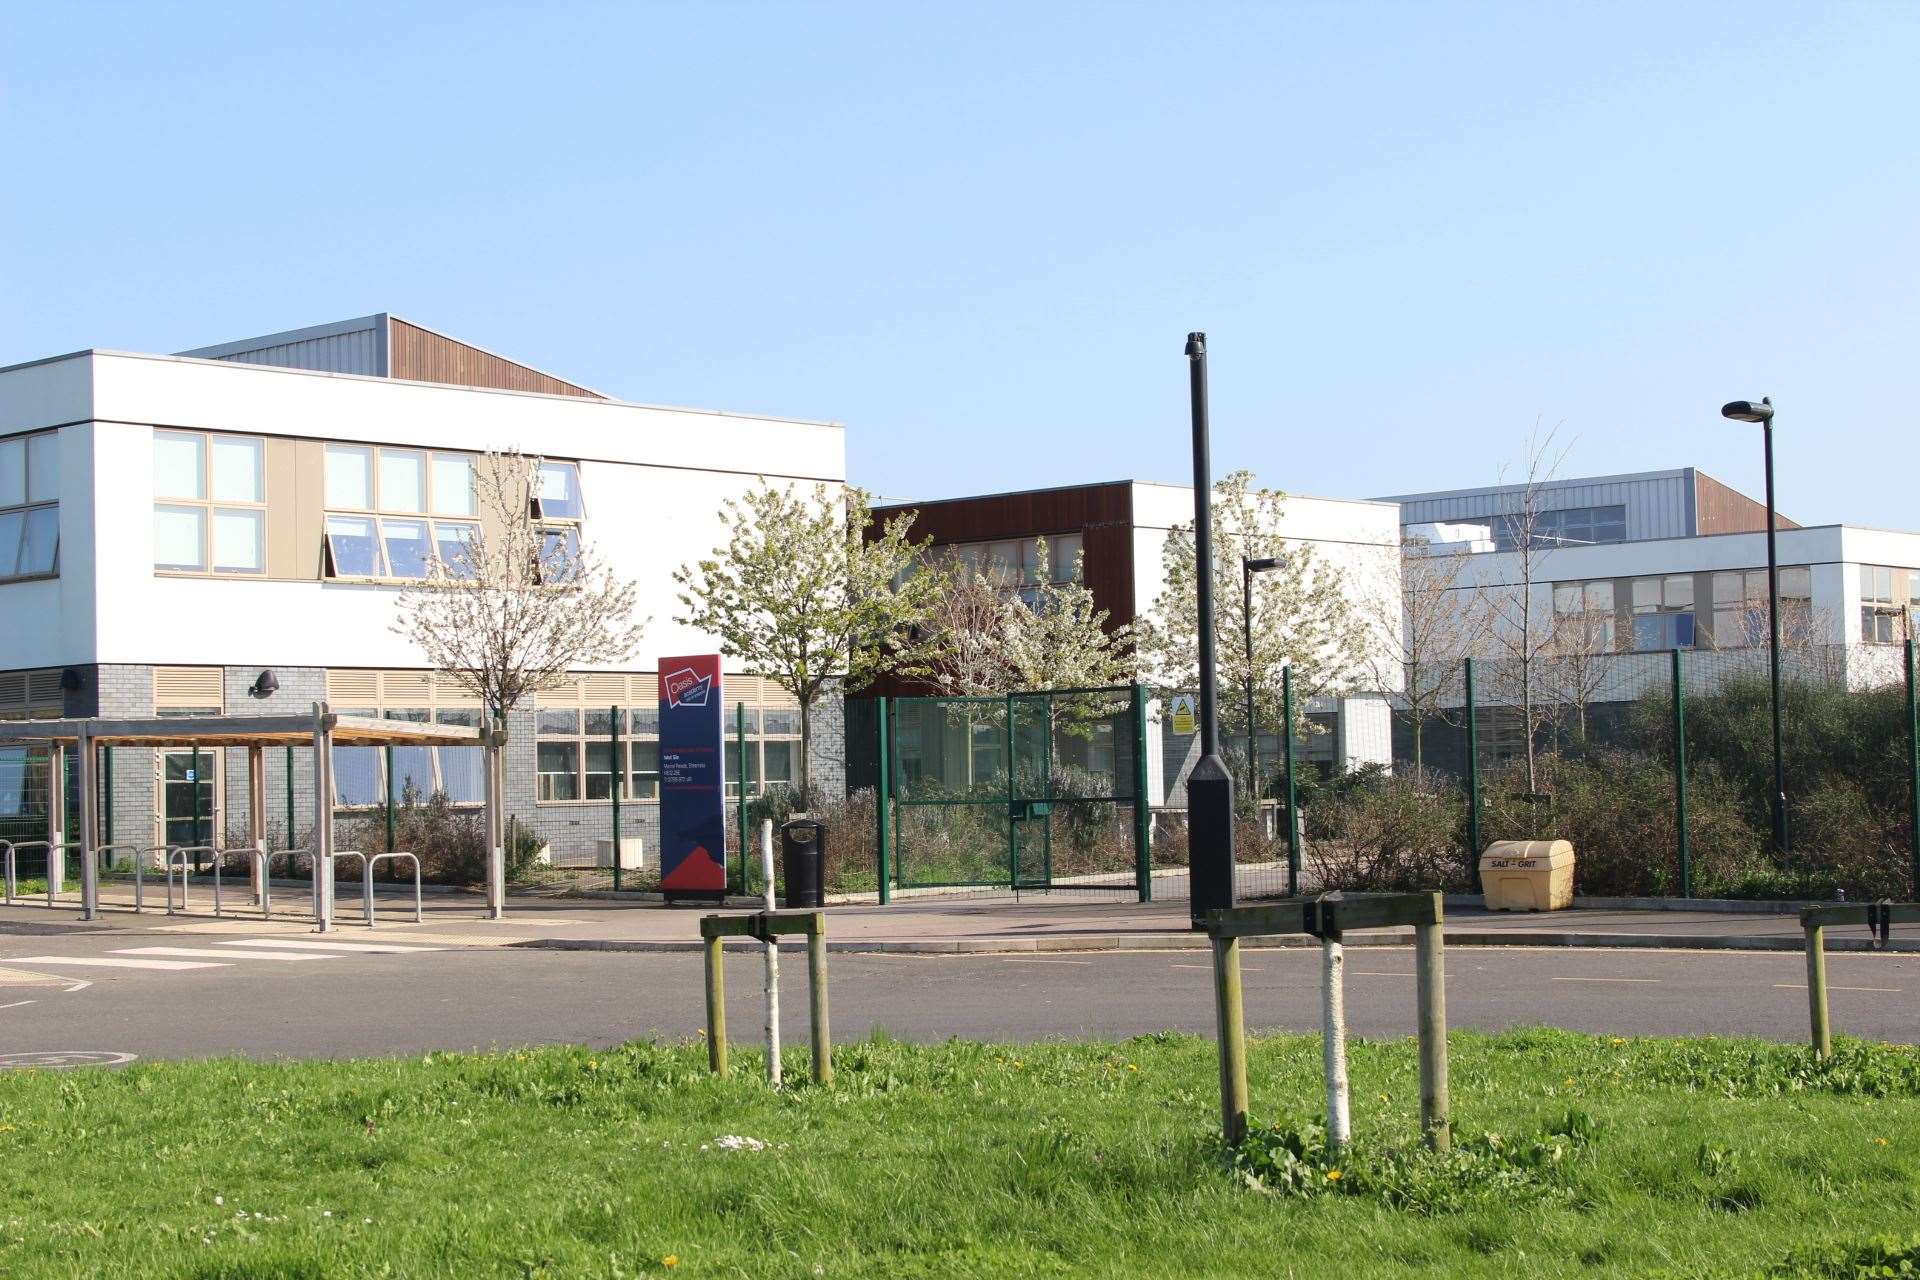 Oasis Isle of Sheppey Academy Sheerness (west site) campus in Marine Parade (12356511)